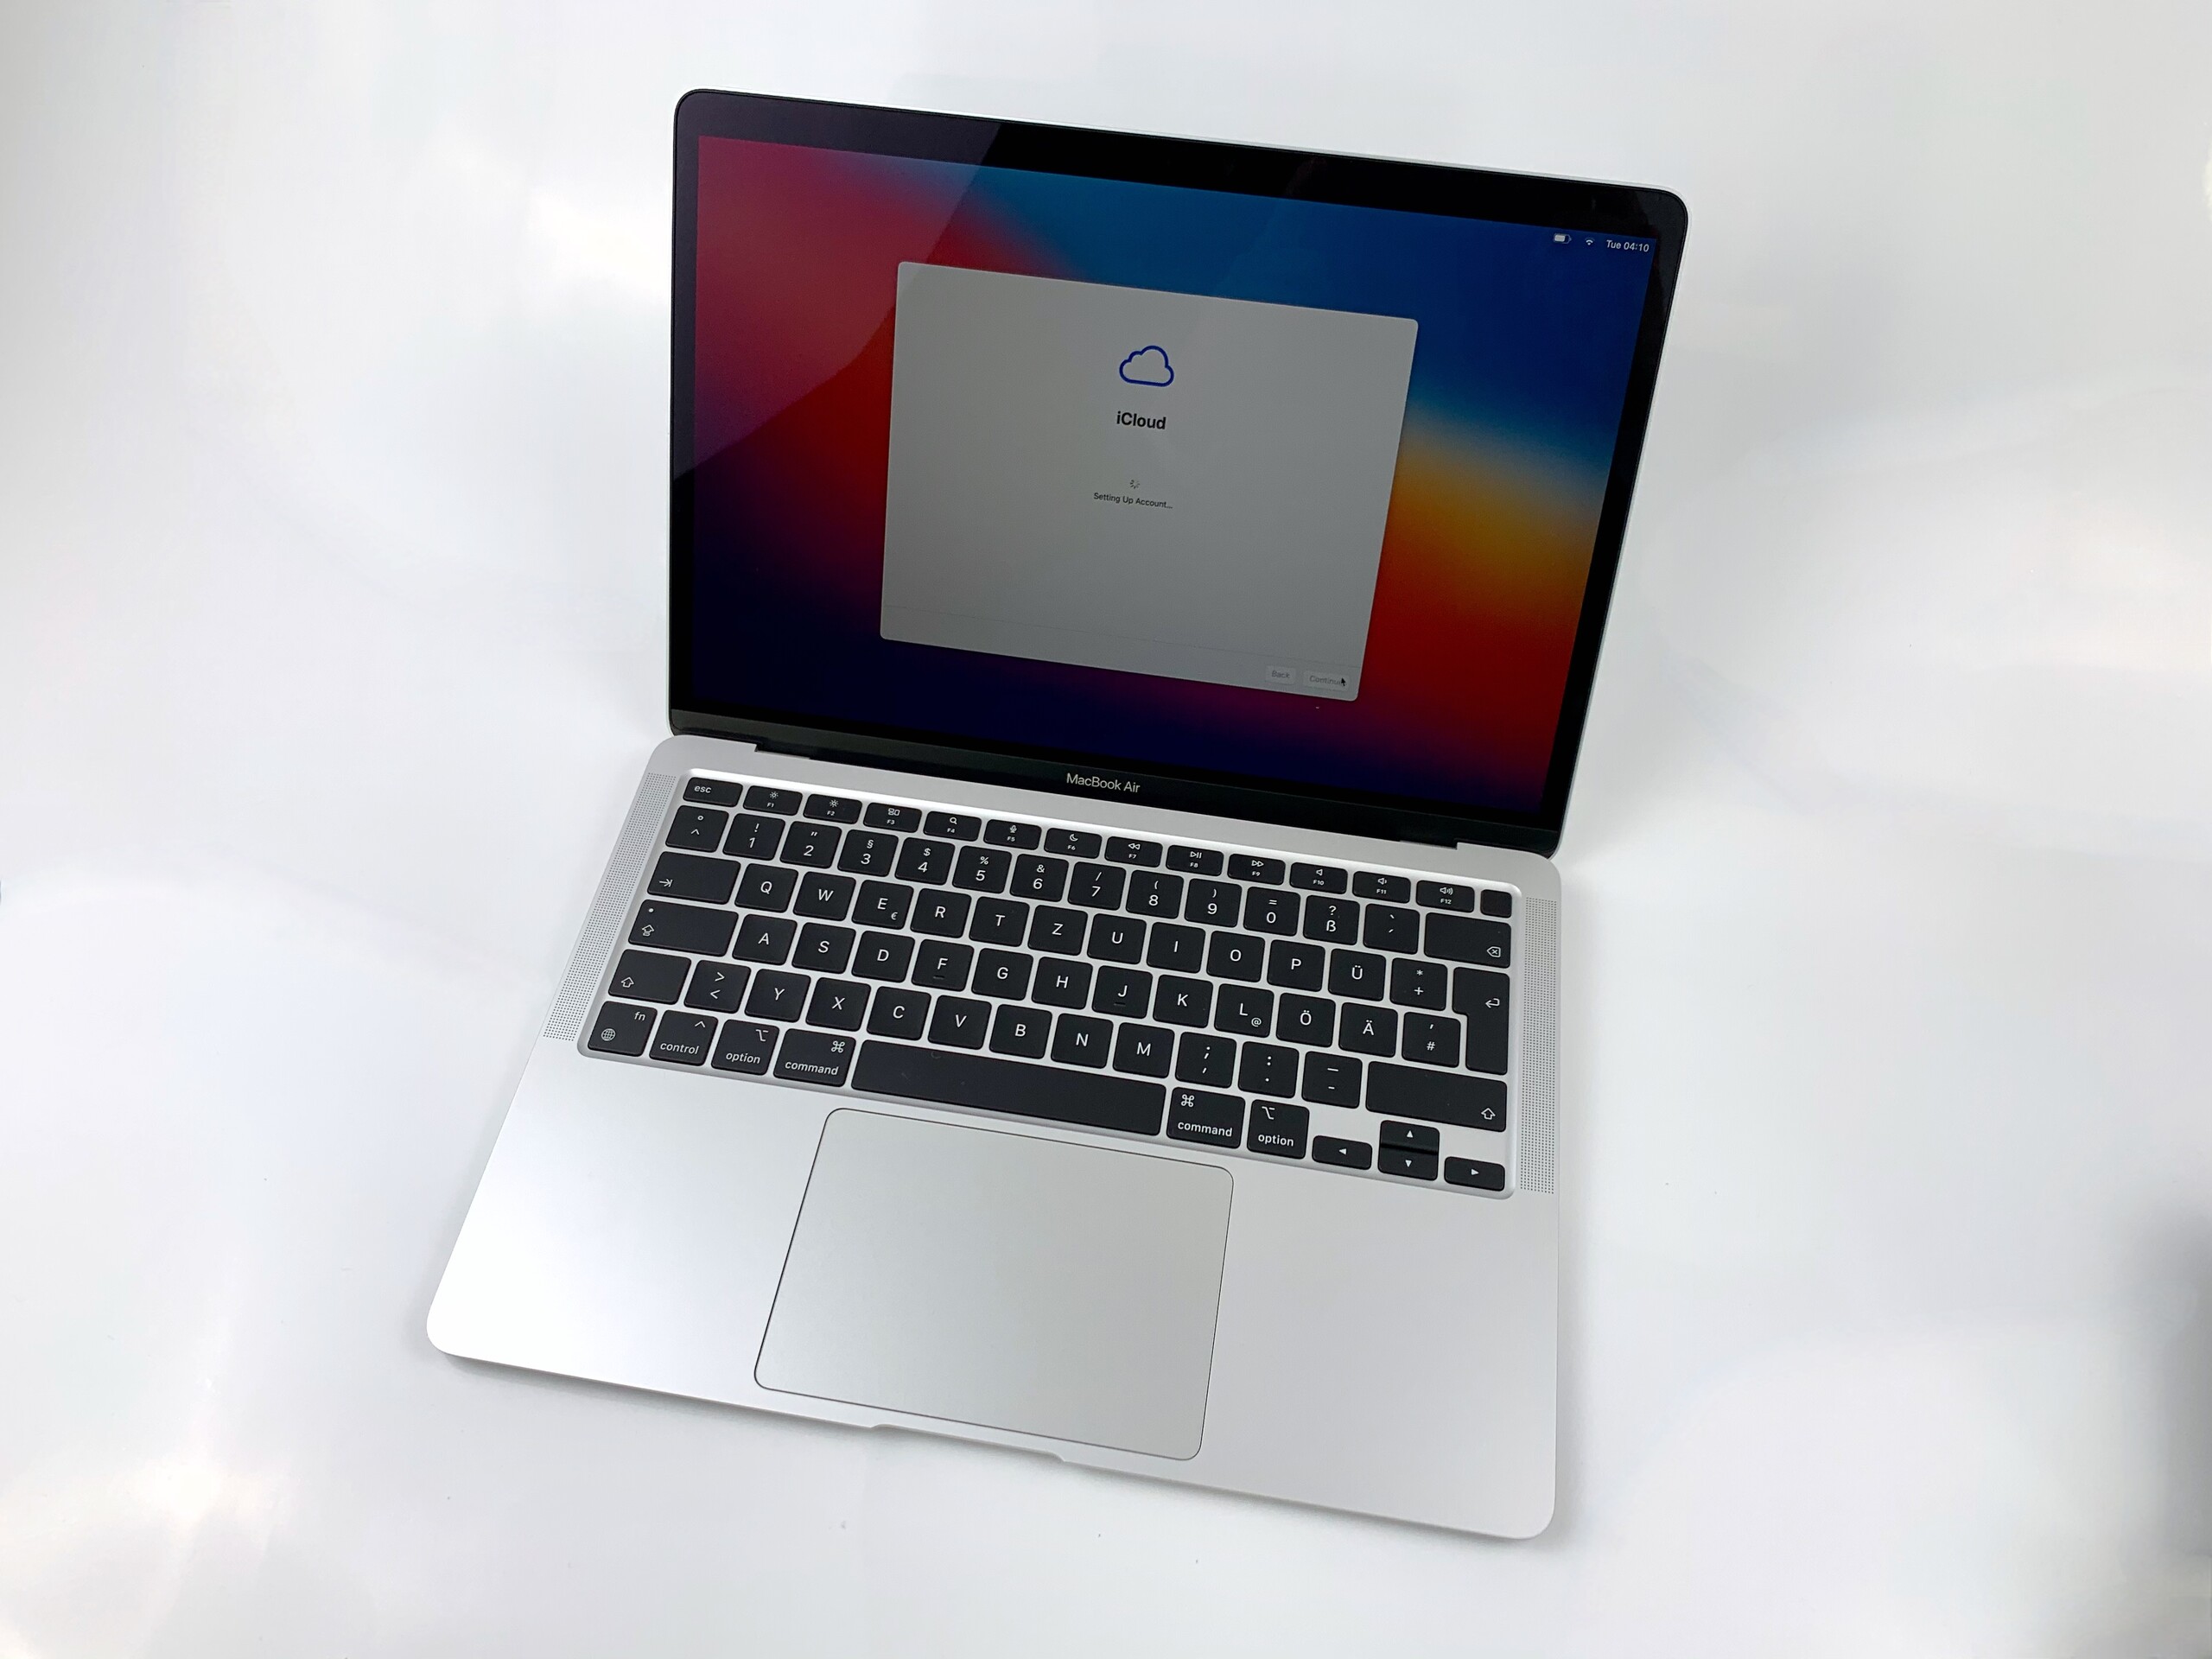 Apple MacBook Air 2020 Review: Should you get the more powerful